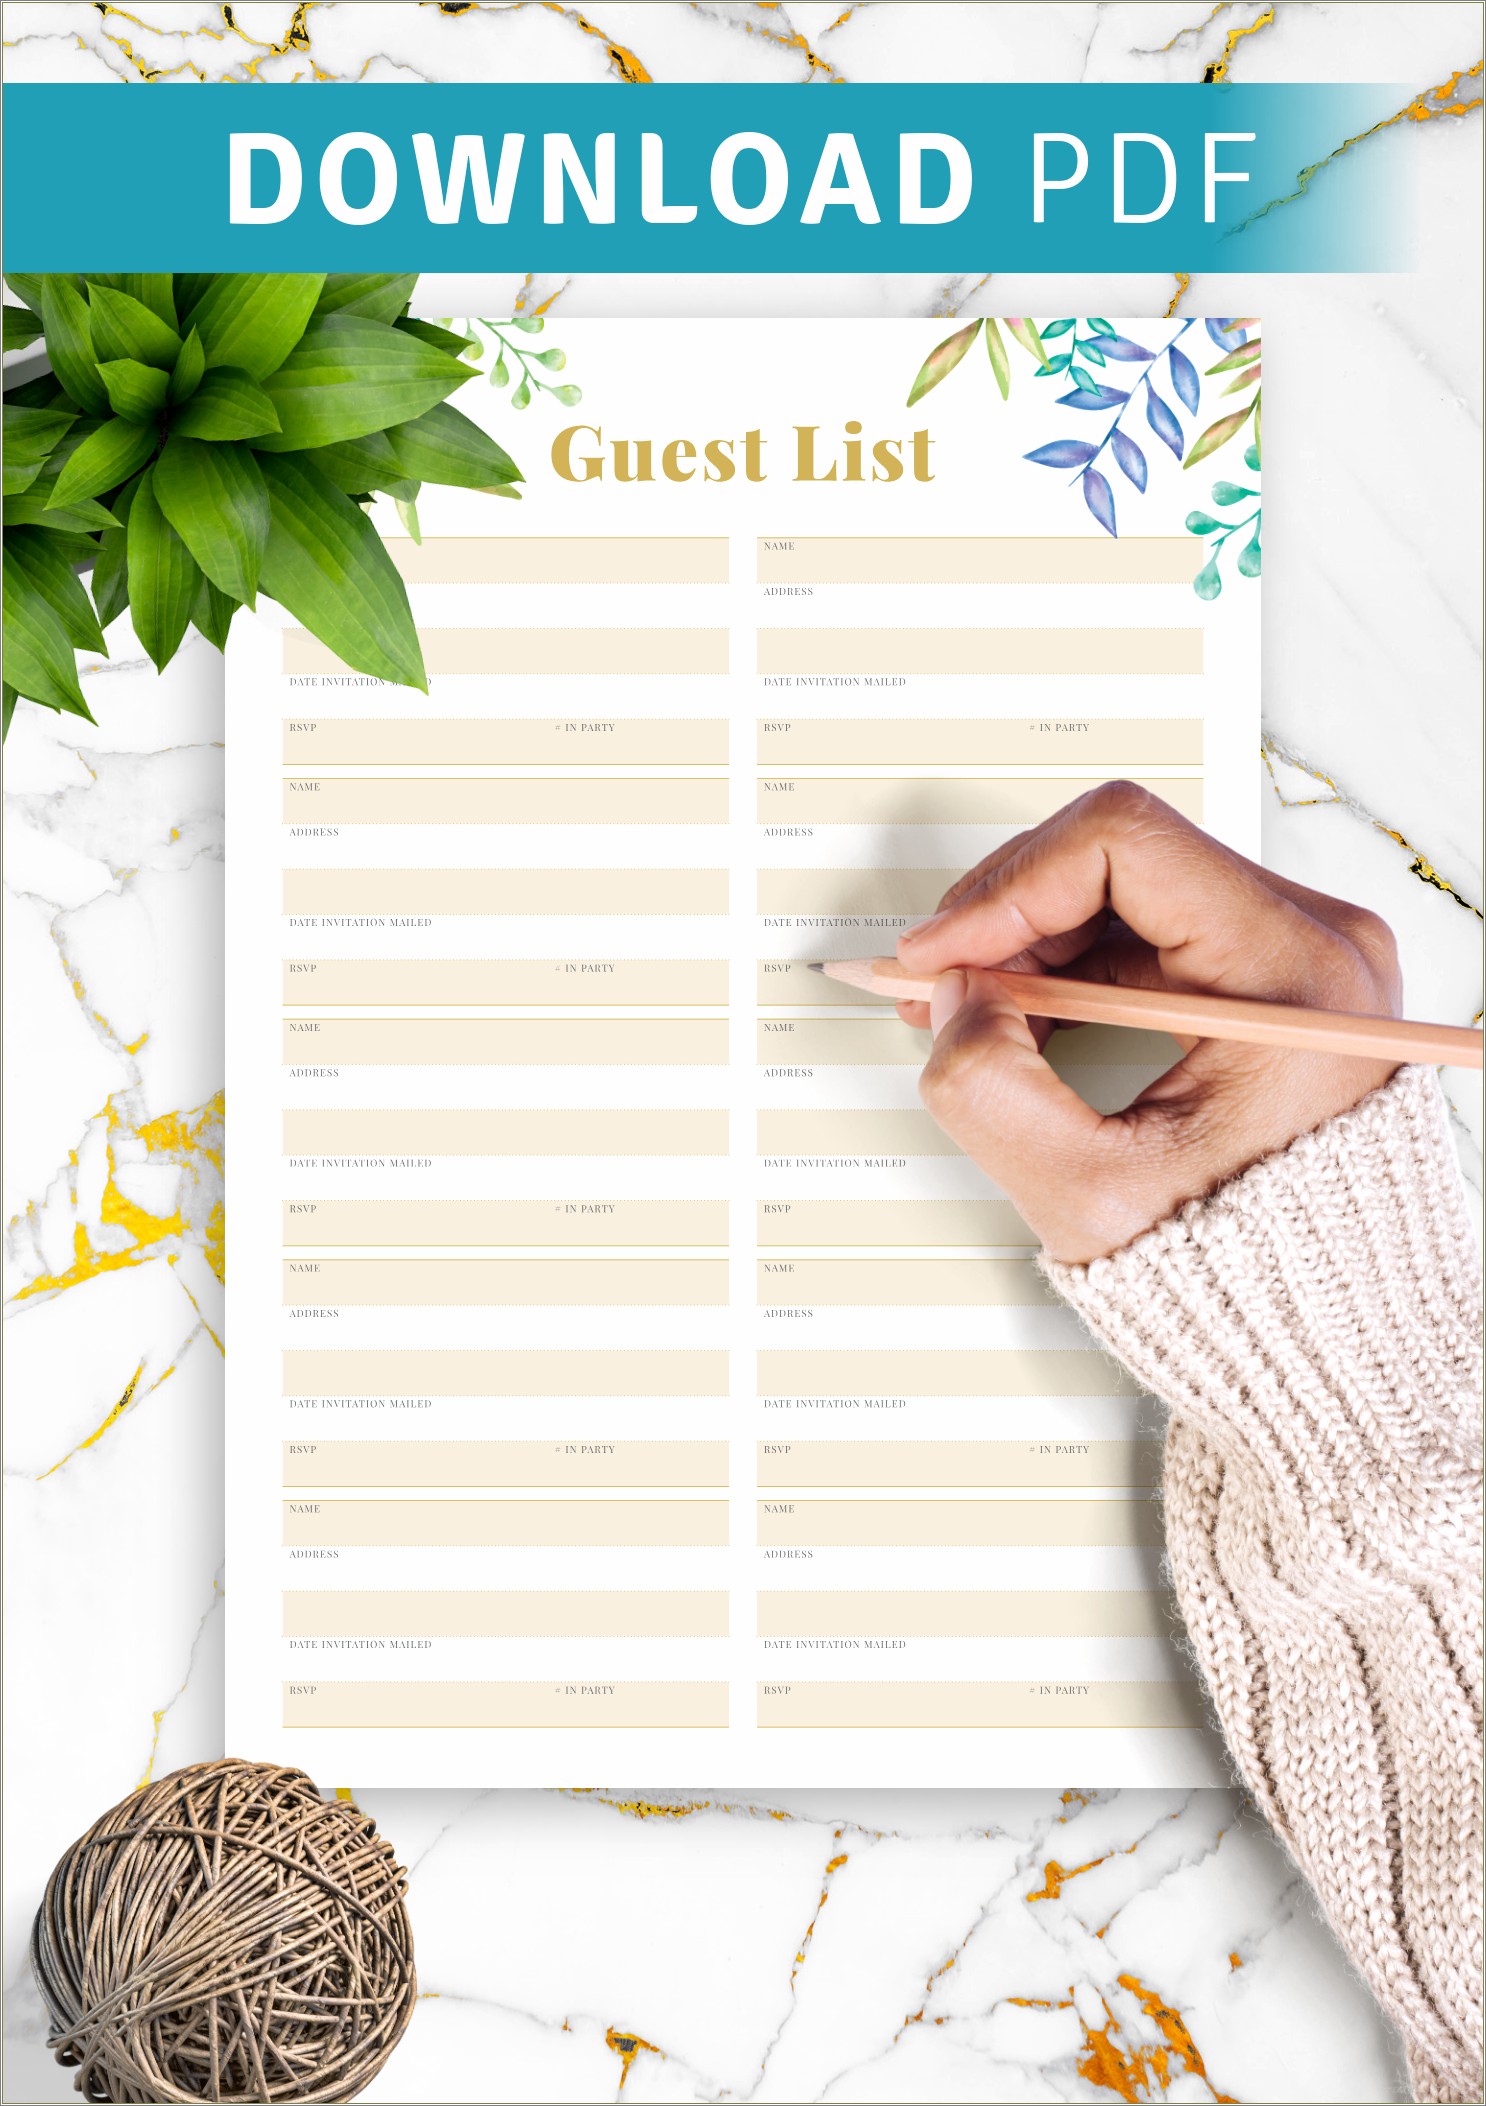 Free Wedding Guest List Template For Mac